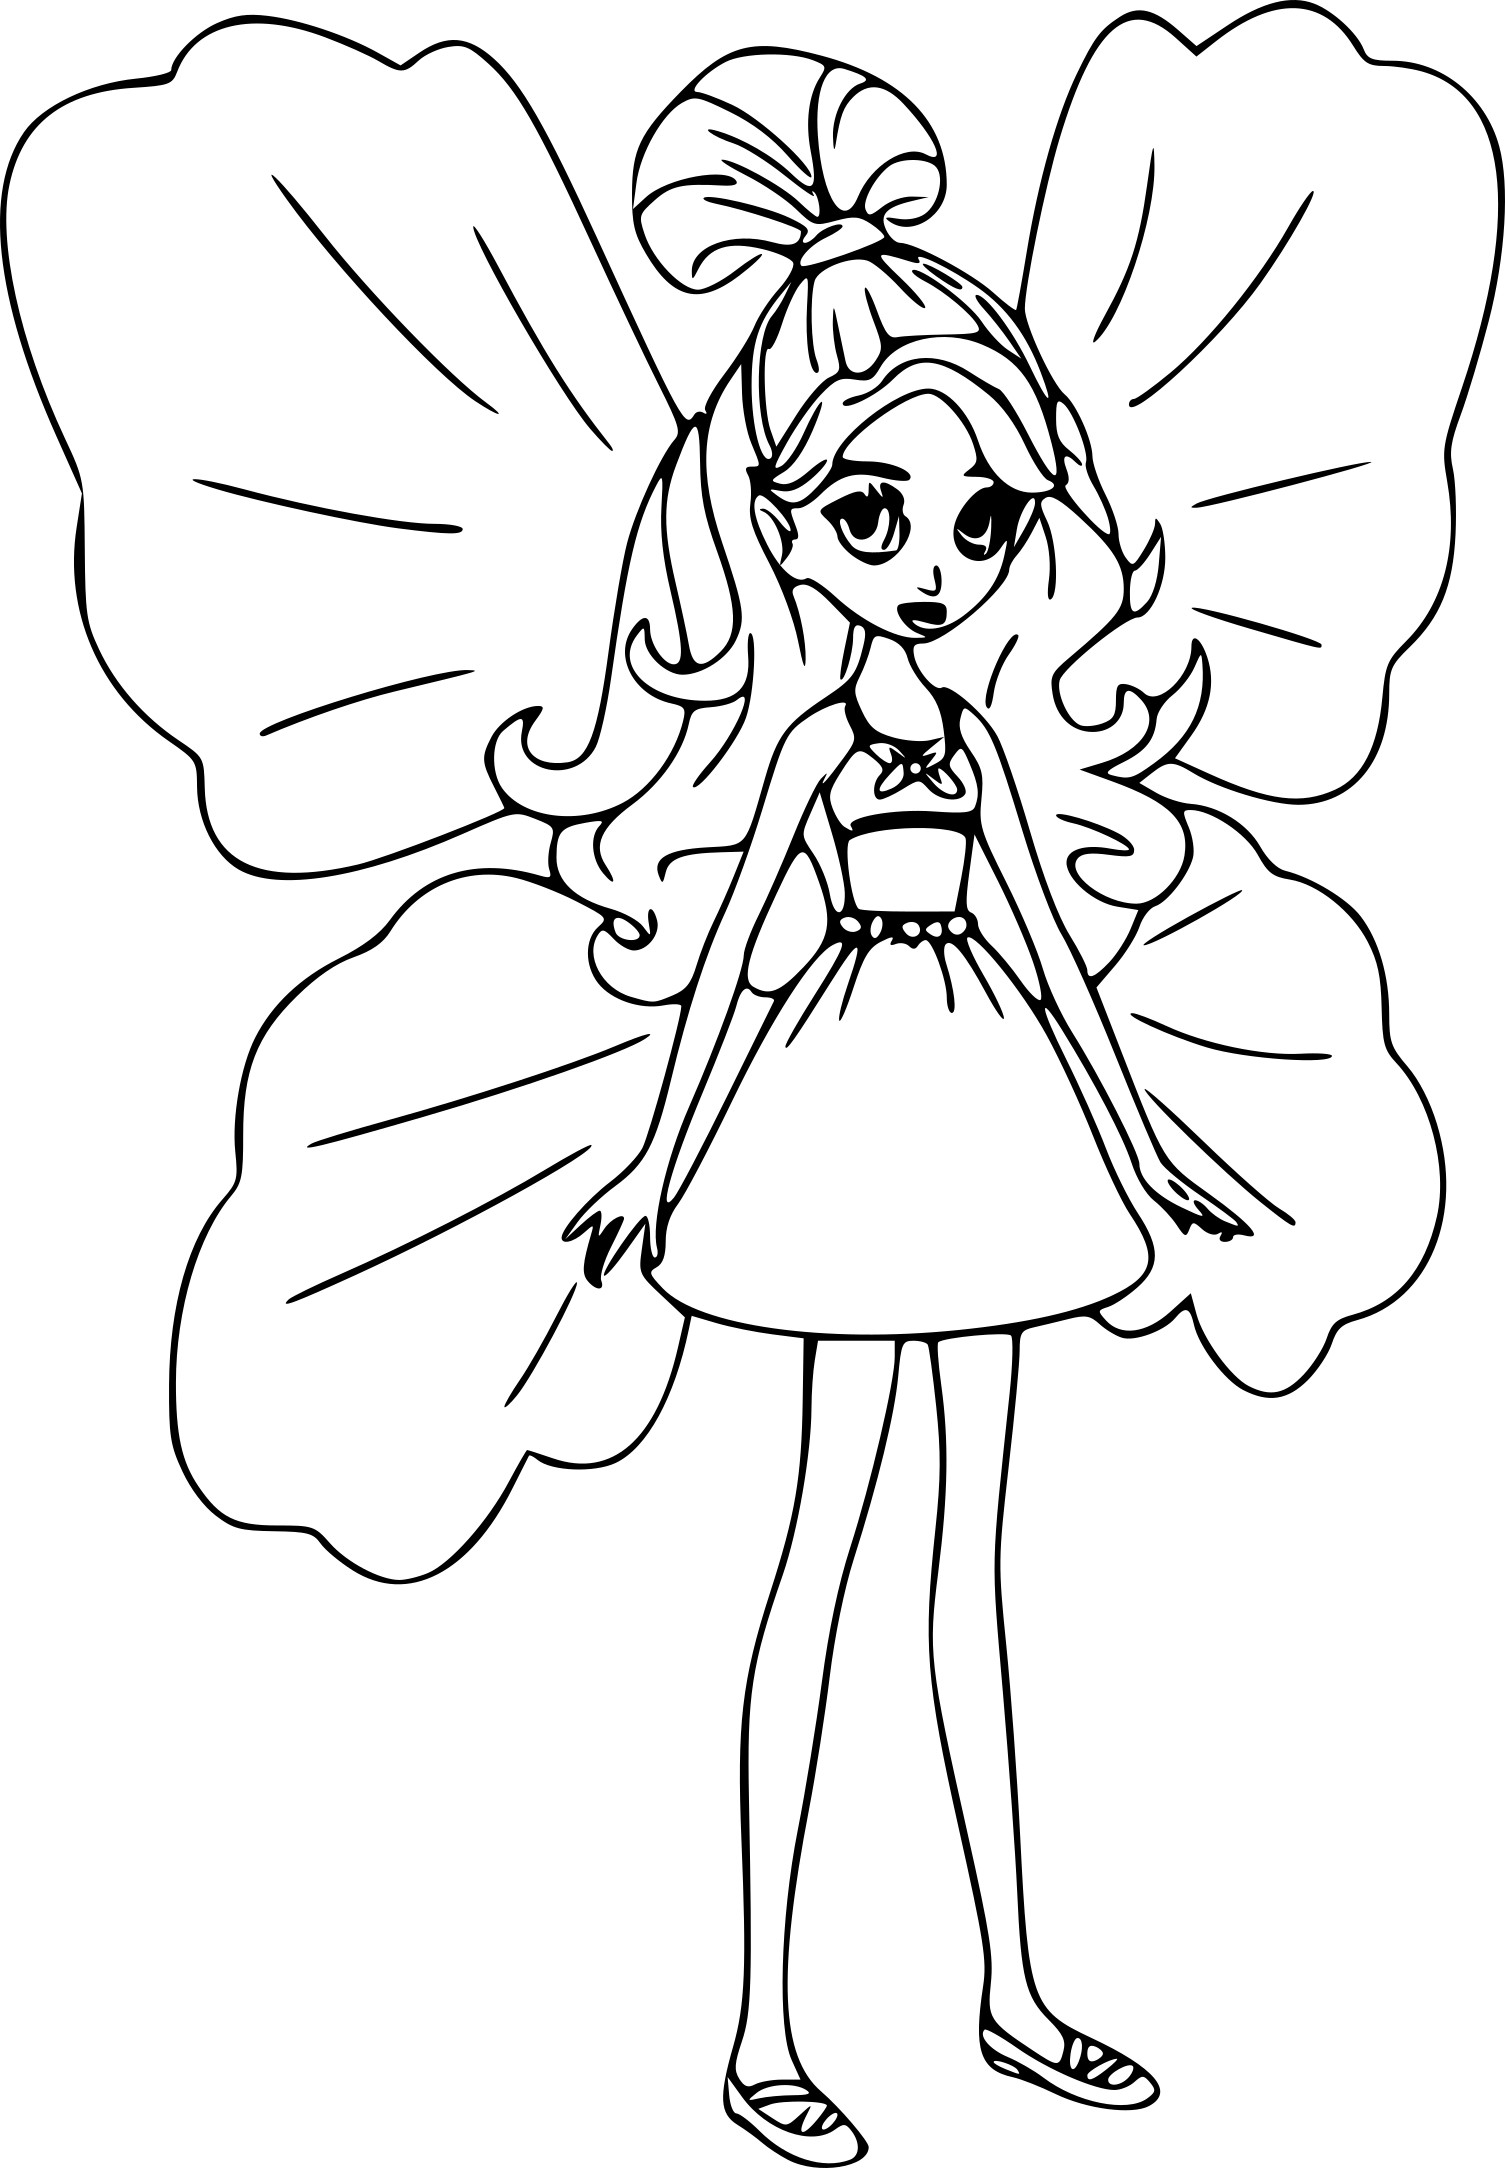 Fairy Janessa coloring page